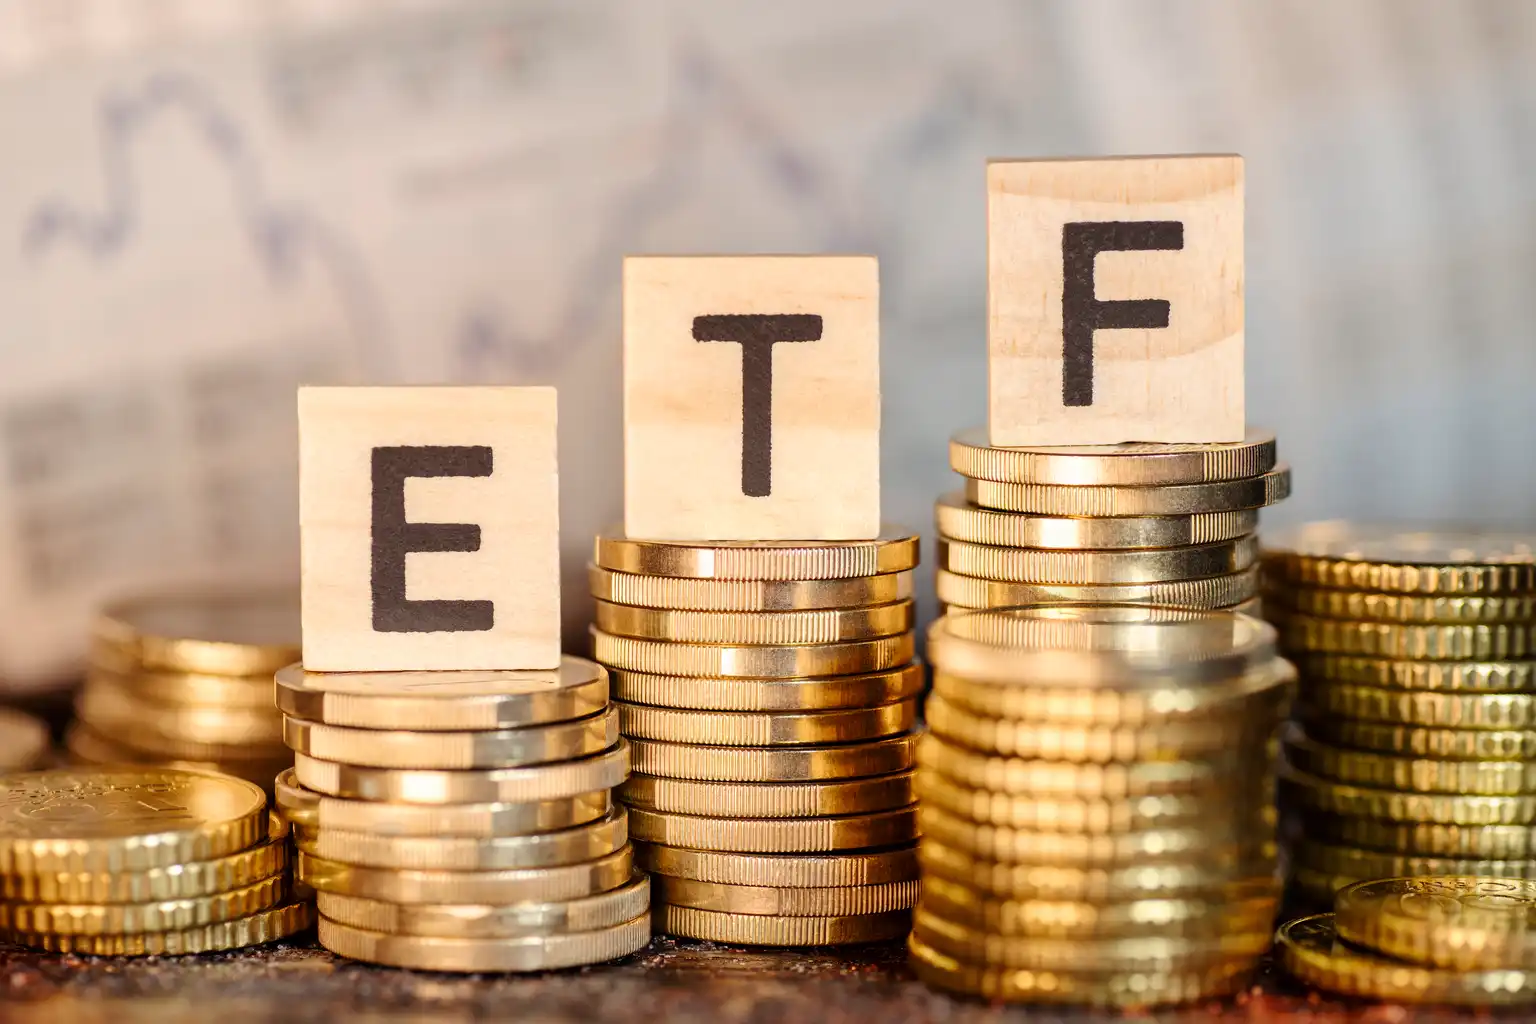 CDL ETF: A Solid Income Option But With Potential Underperformance - Seeking Alpha